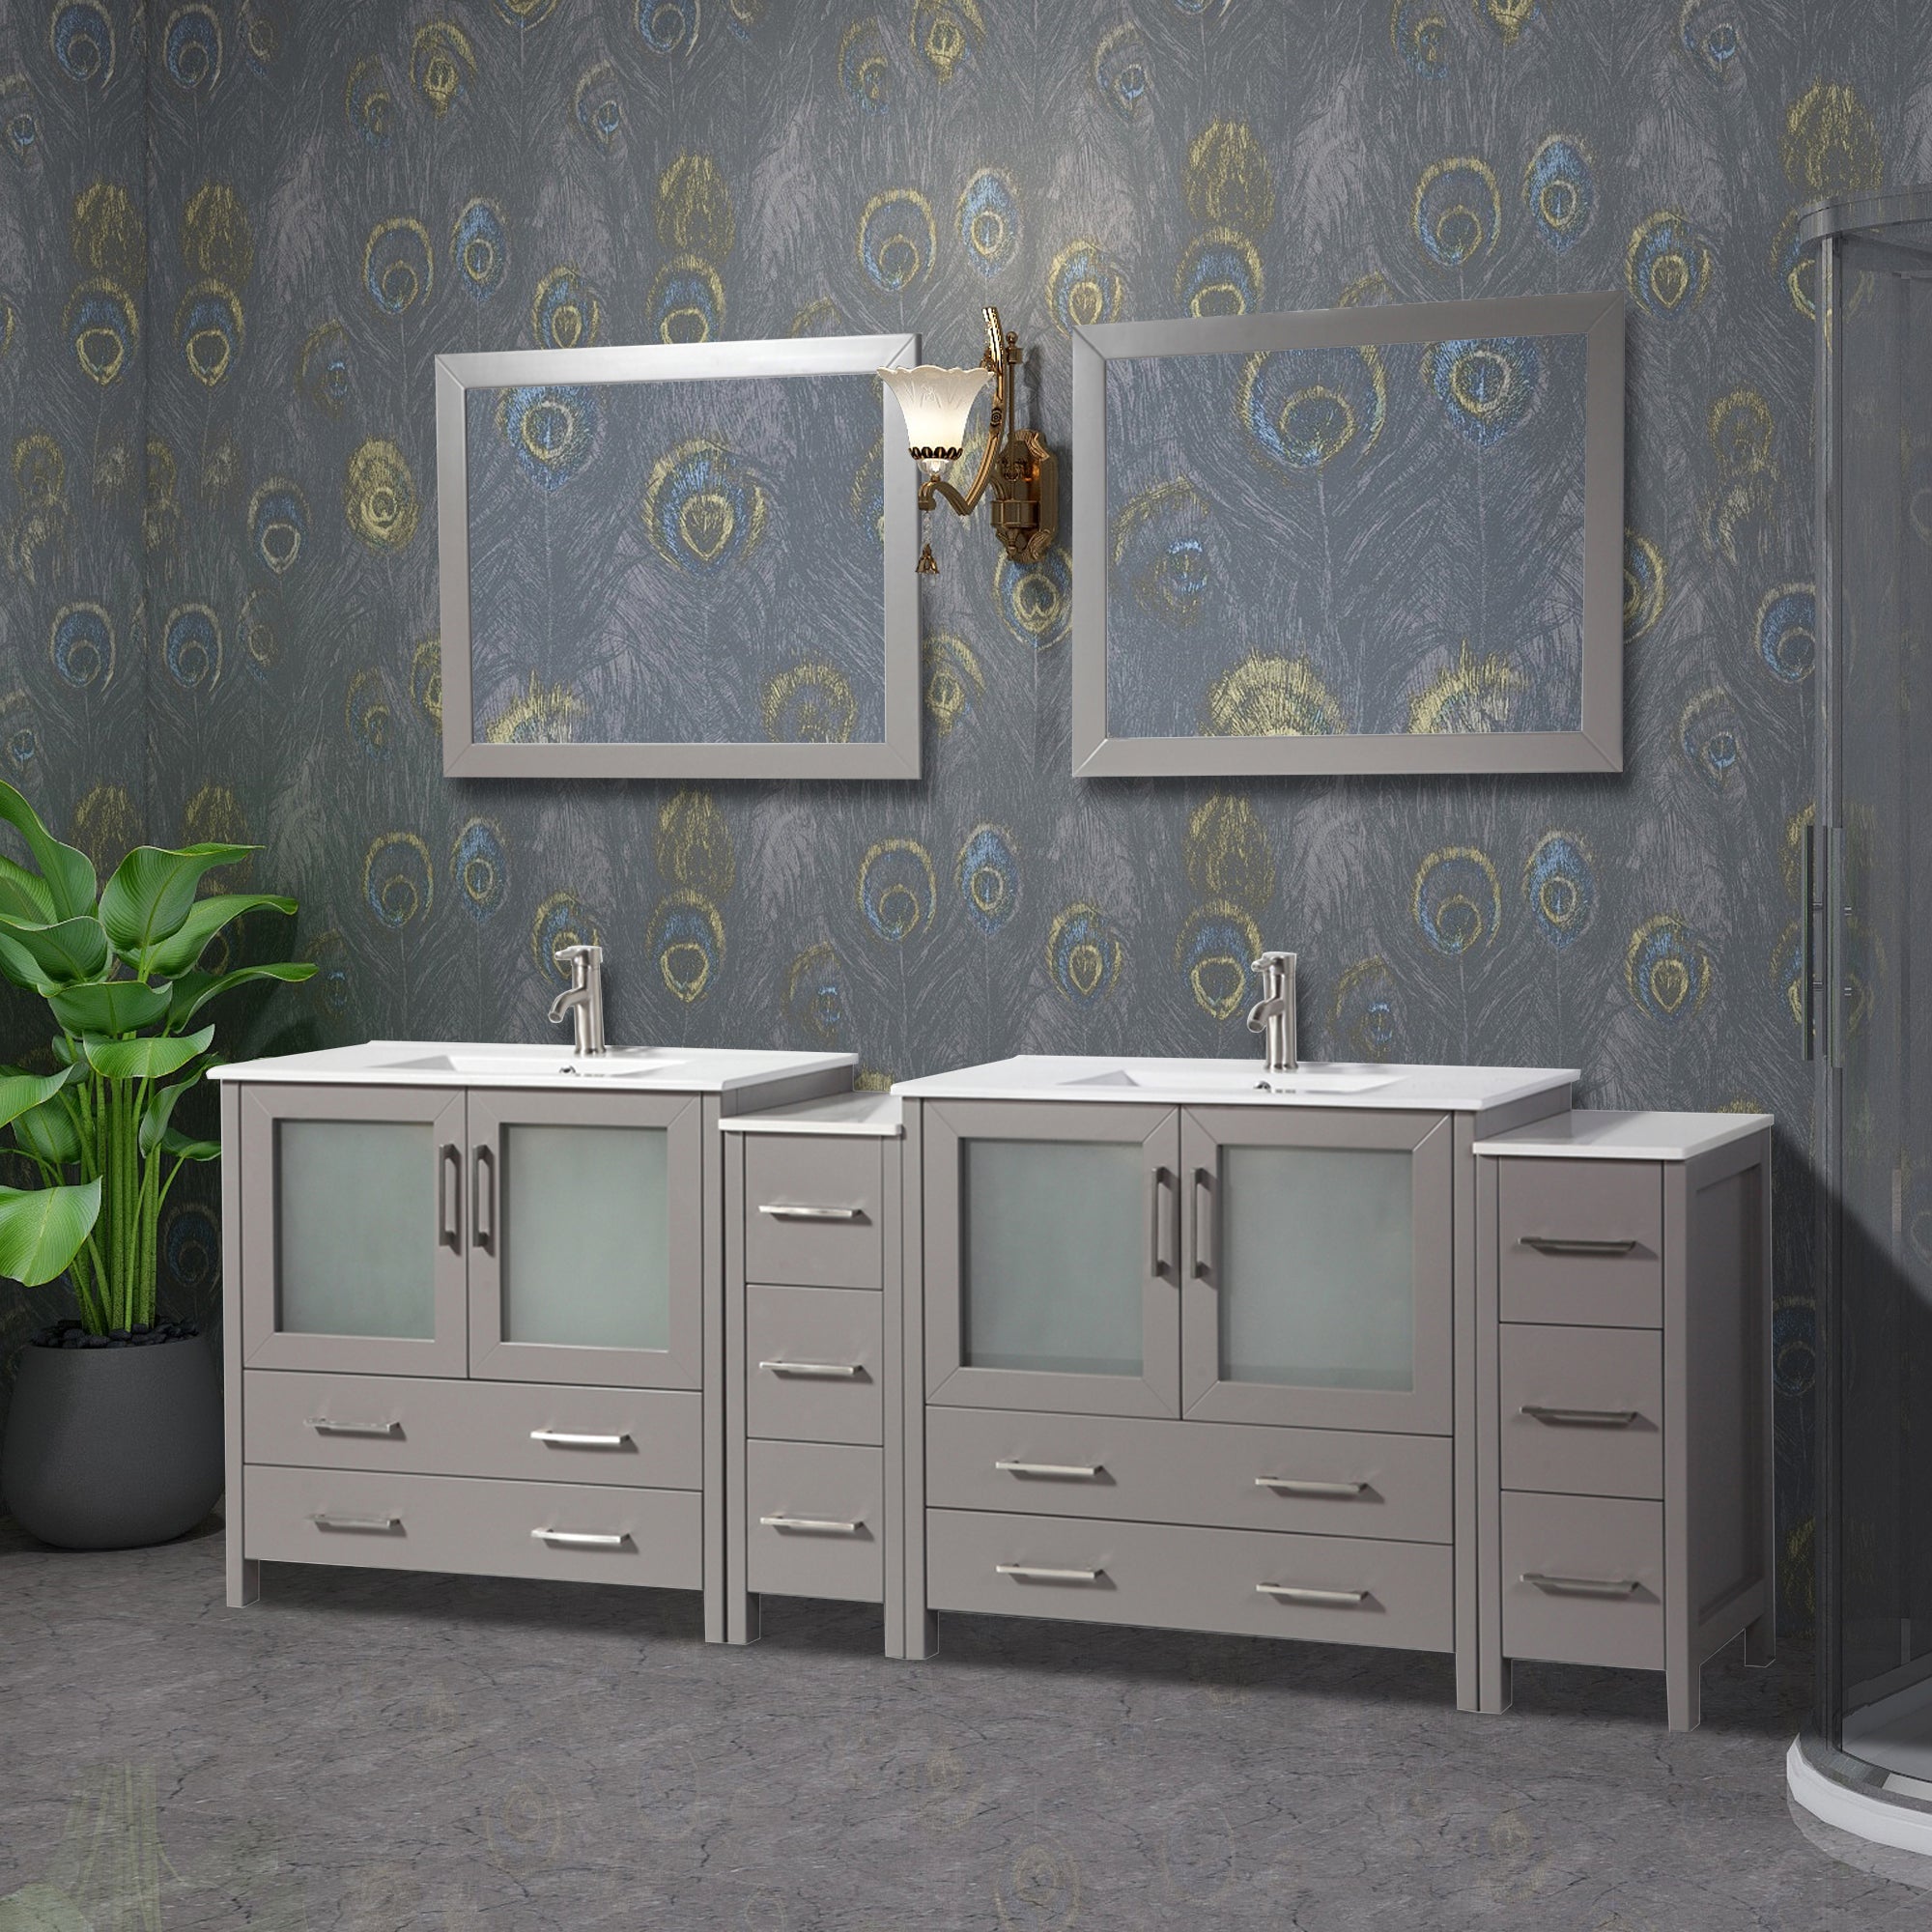 Vanity Art - London 96" Double Sink Bathroom Vanity Set with Sink and Mirrors - 2 Side Cabinets - Bhdepot 